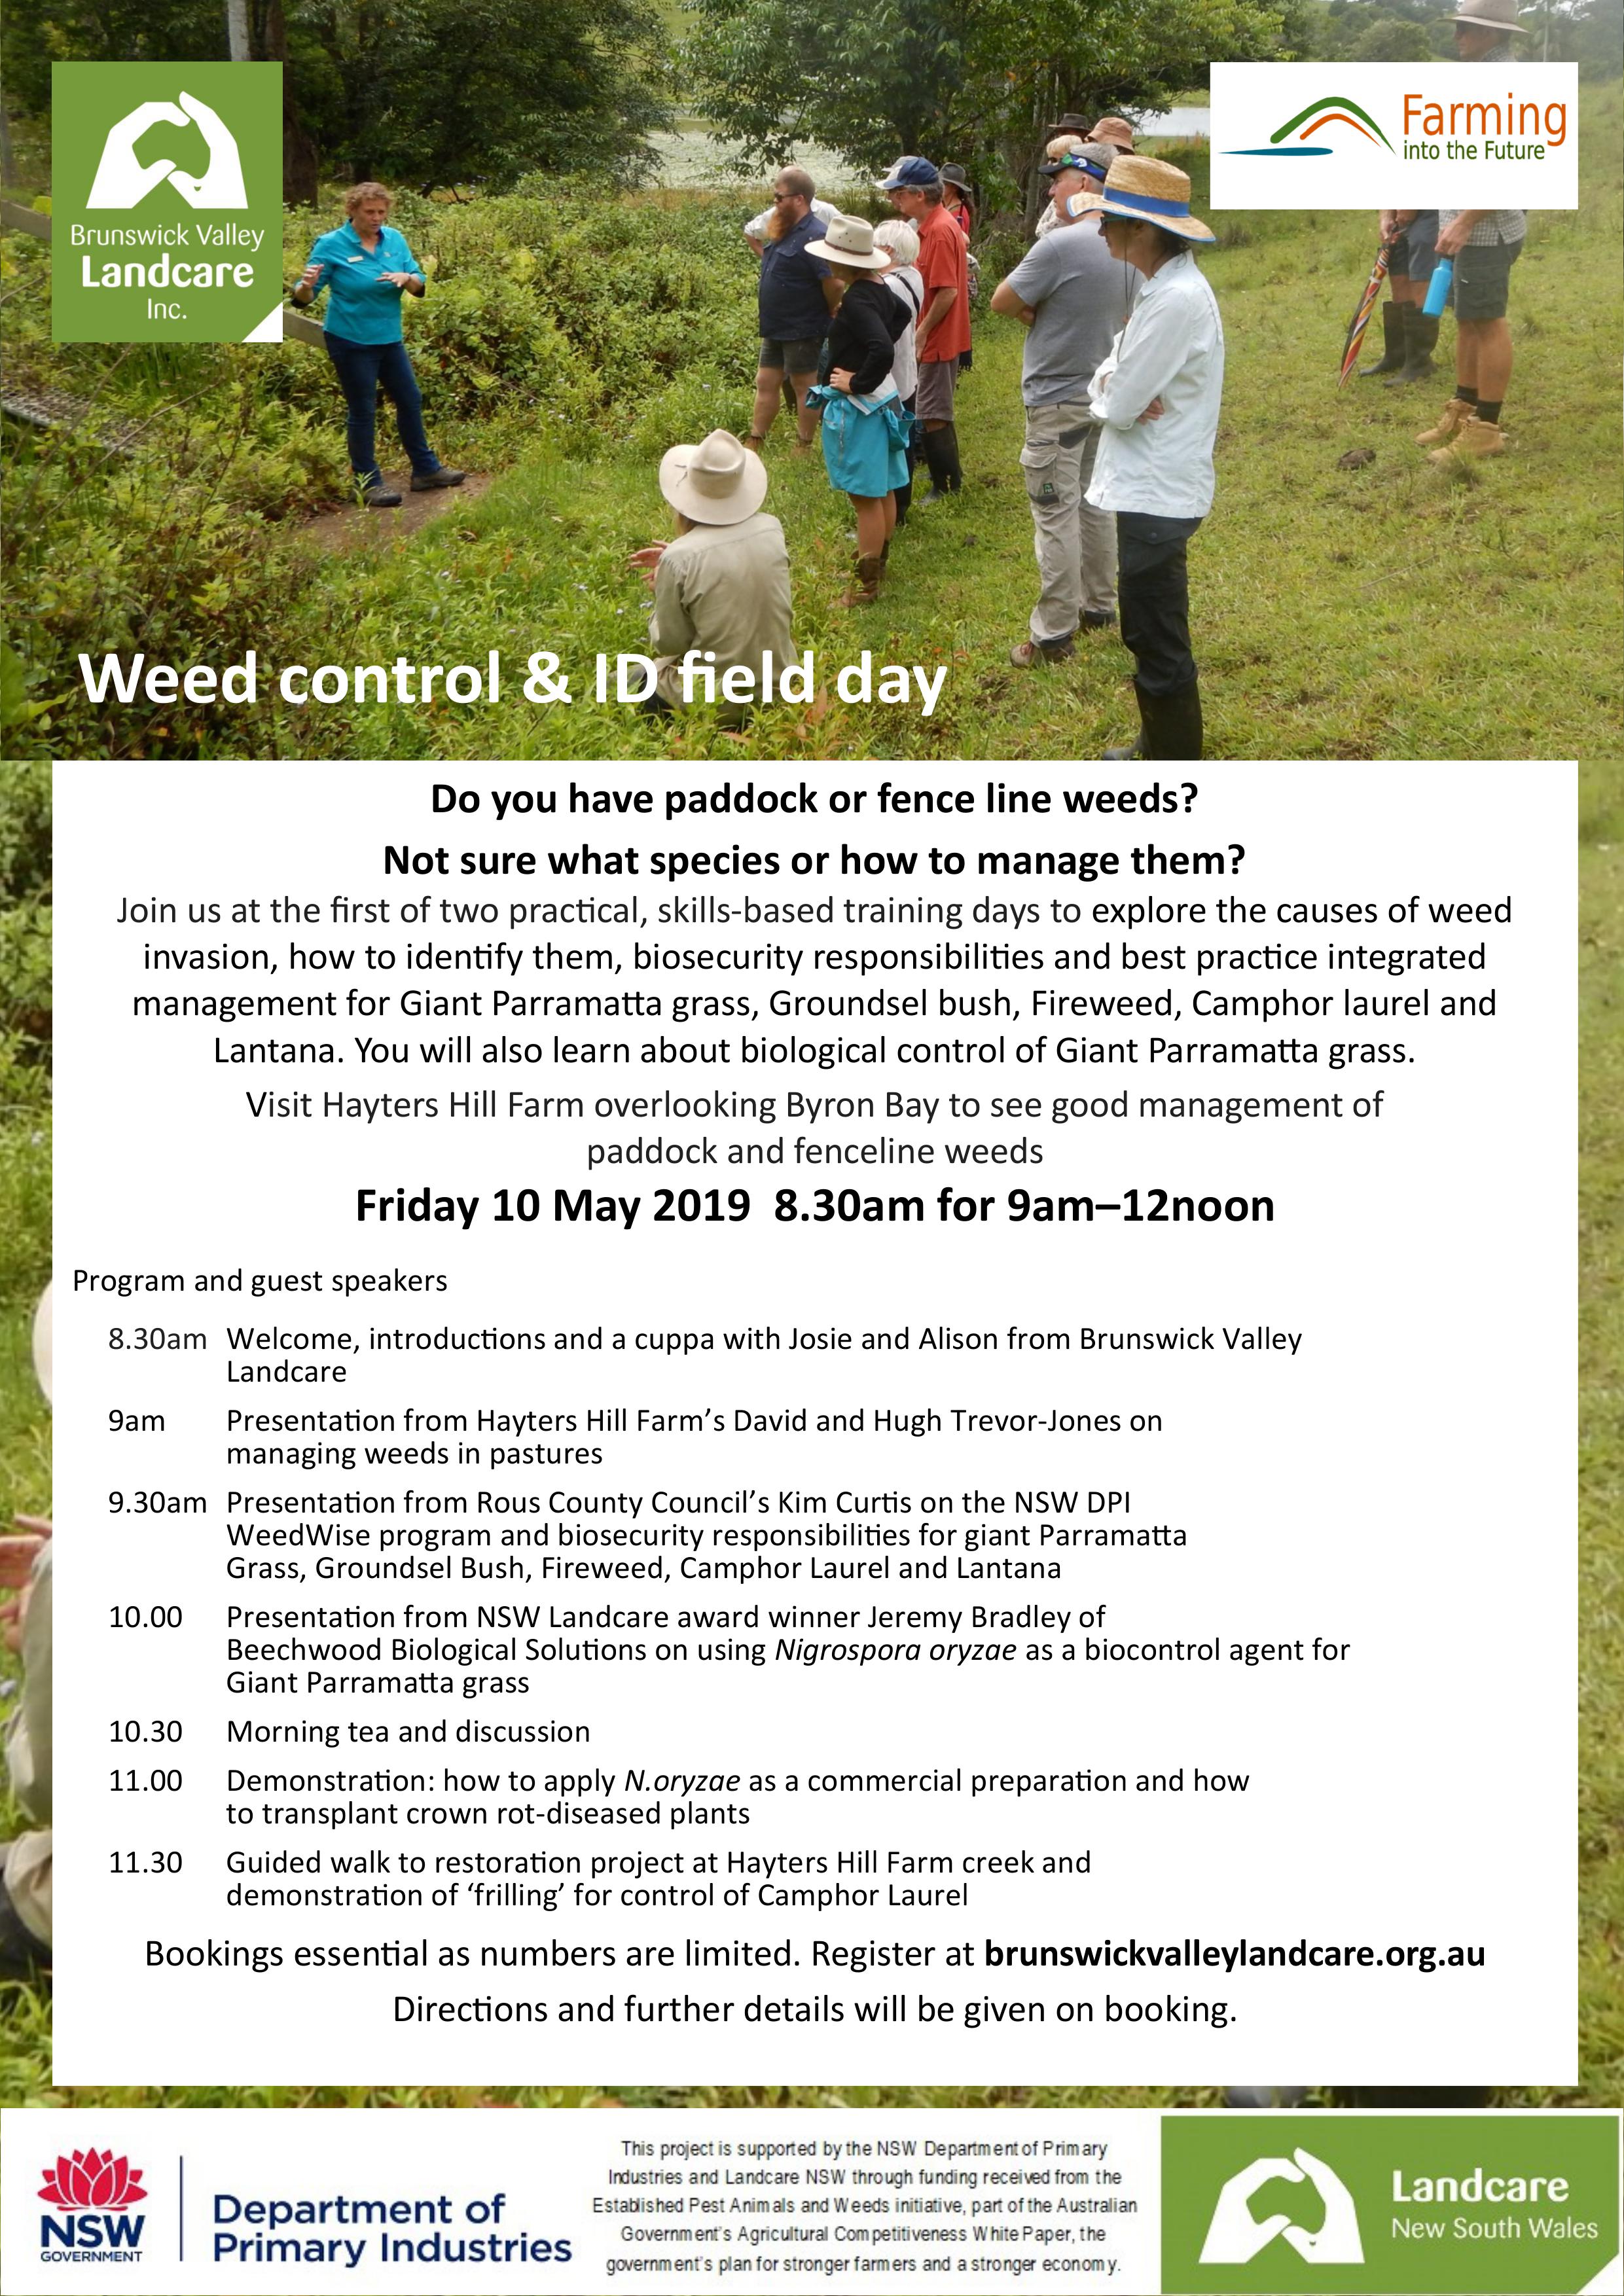 Weed control & ID field day flyer